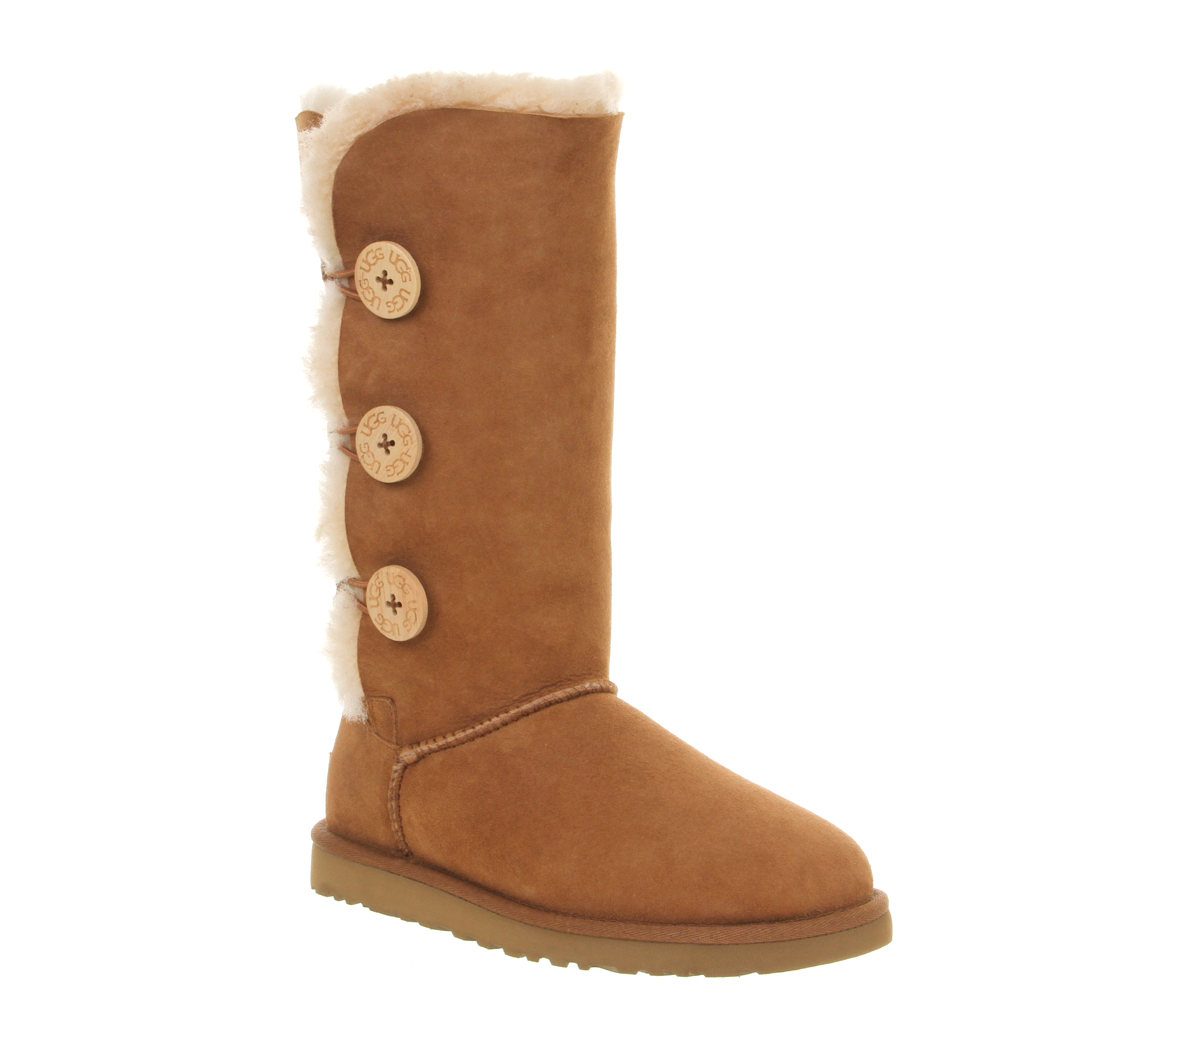 bailey button ugg boots uk